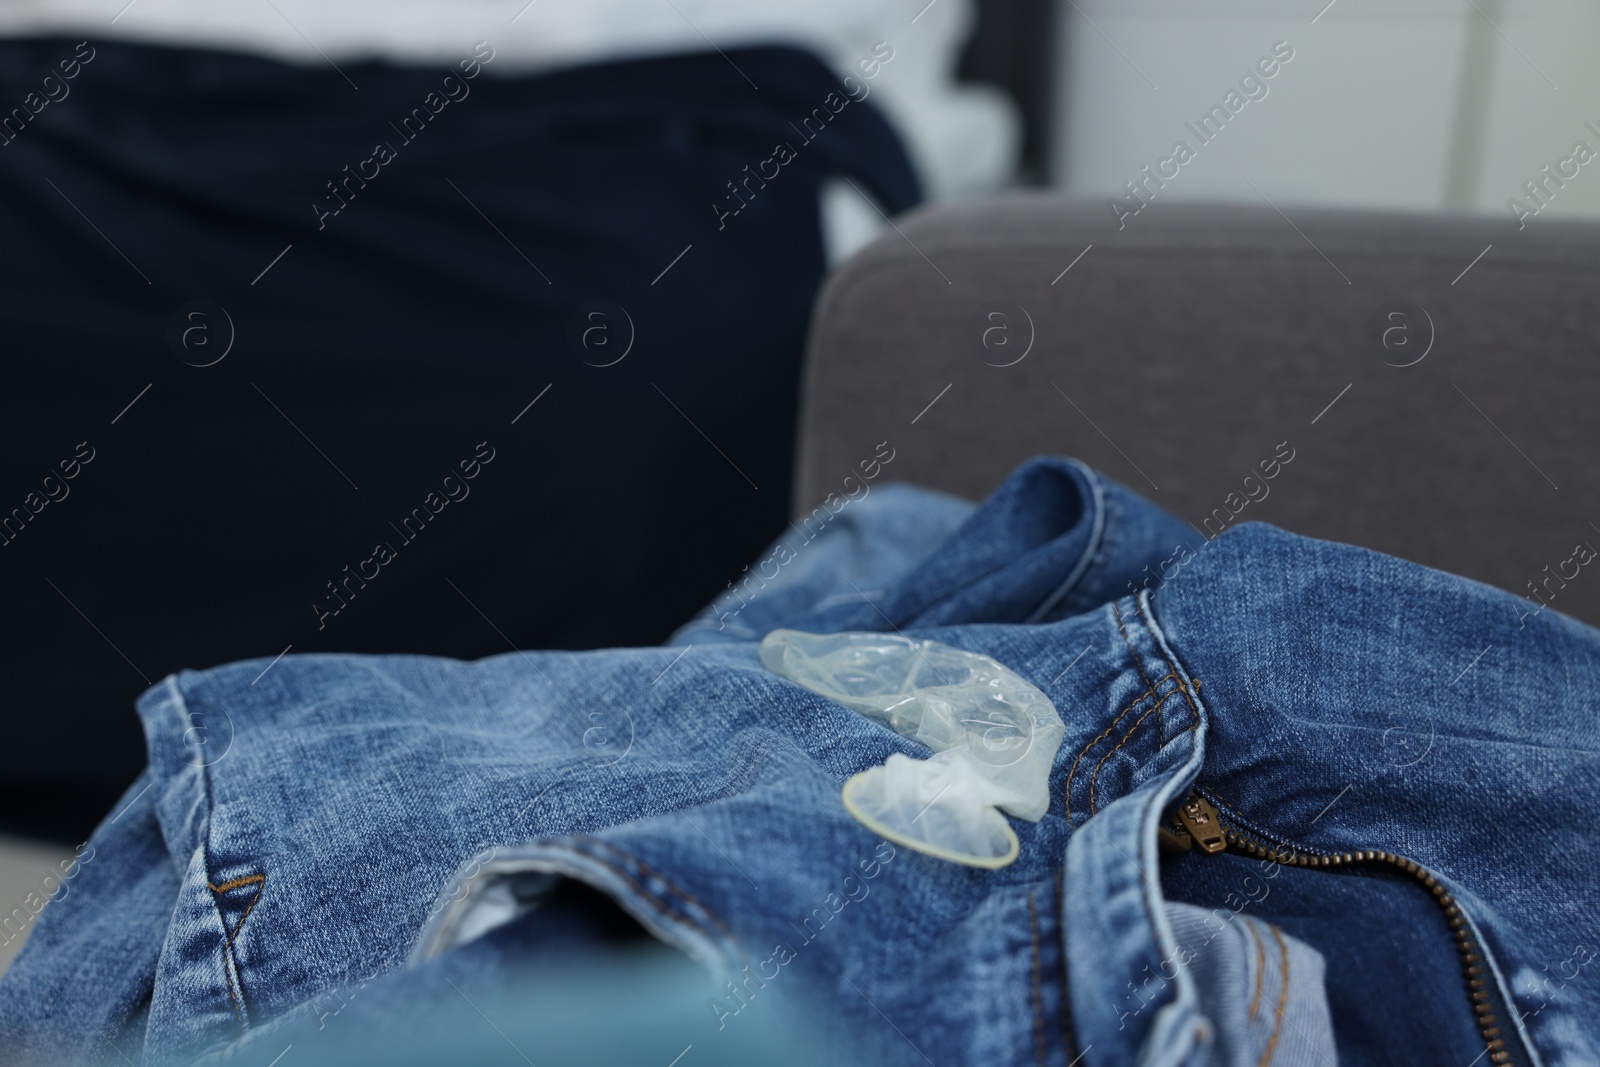 Photo of Unrolled condom and jeans in bedroom. Safe sex